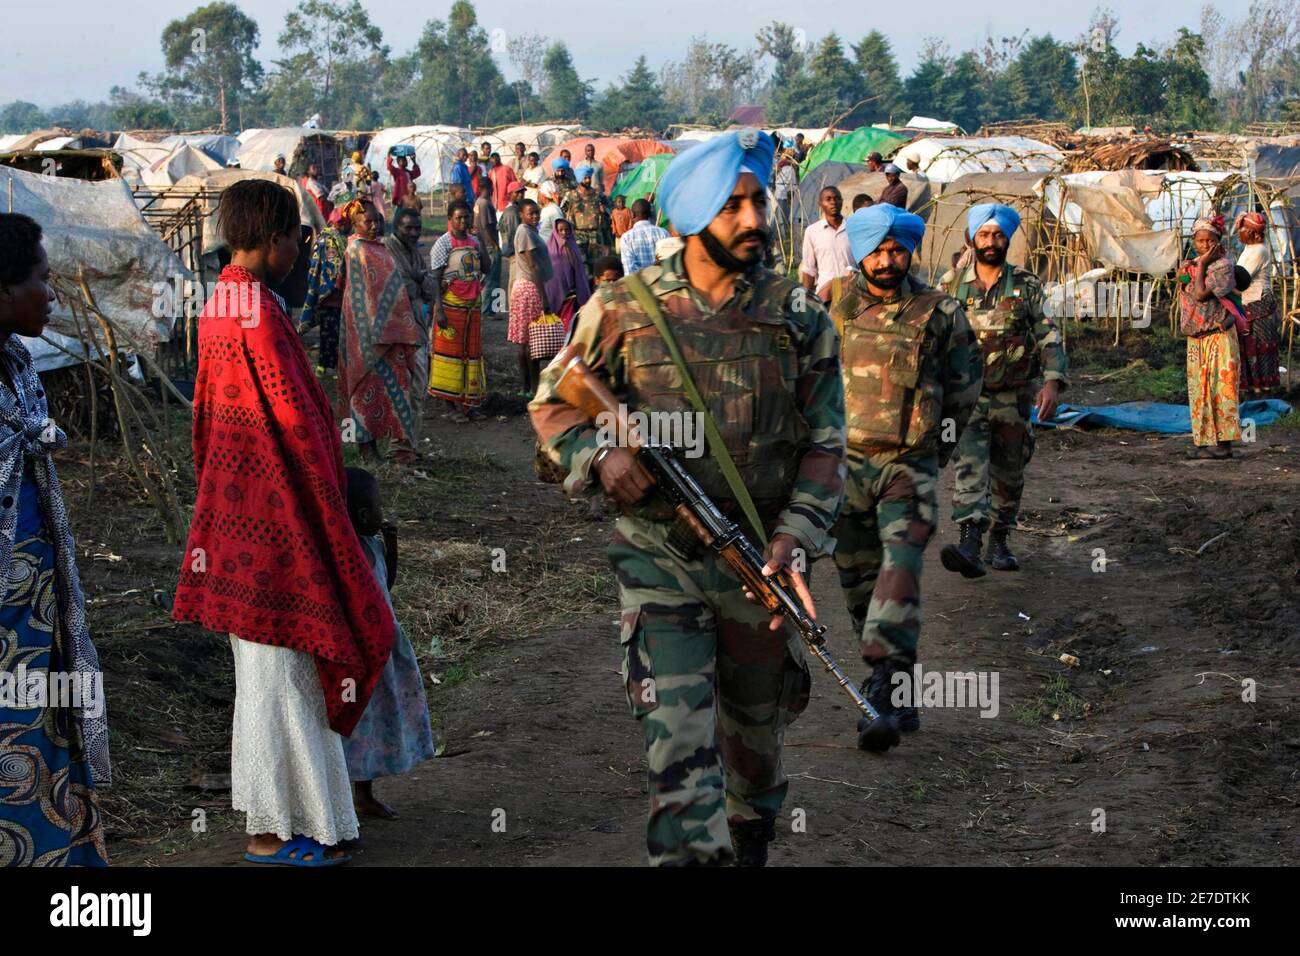 Indian U.N. peacekeepers patrol through a camp for people displaced by fighting in Kiwanja, 70 km (50 miles) north of Goma in eastern Congo, November 22, 2008. REUTERS/Finbarr O'Reilly (DEMOCRATIC REPUBLIC OF CONGO) Stock Photo